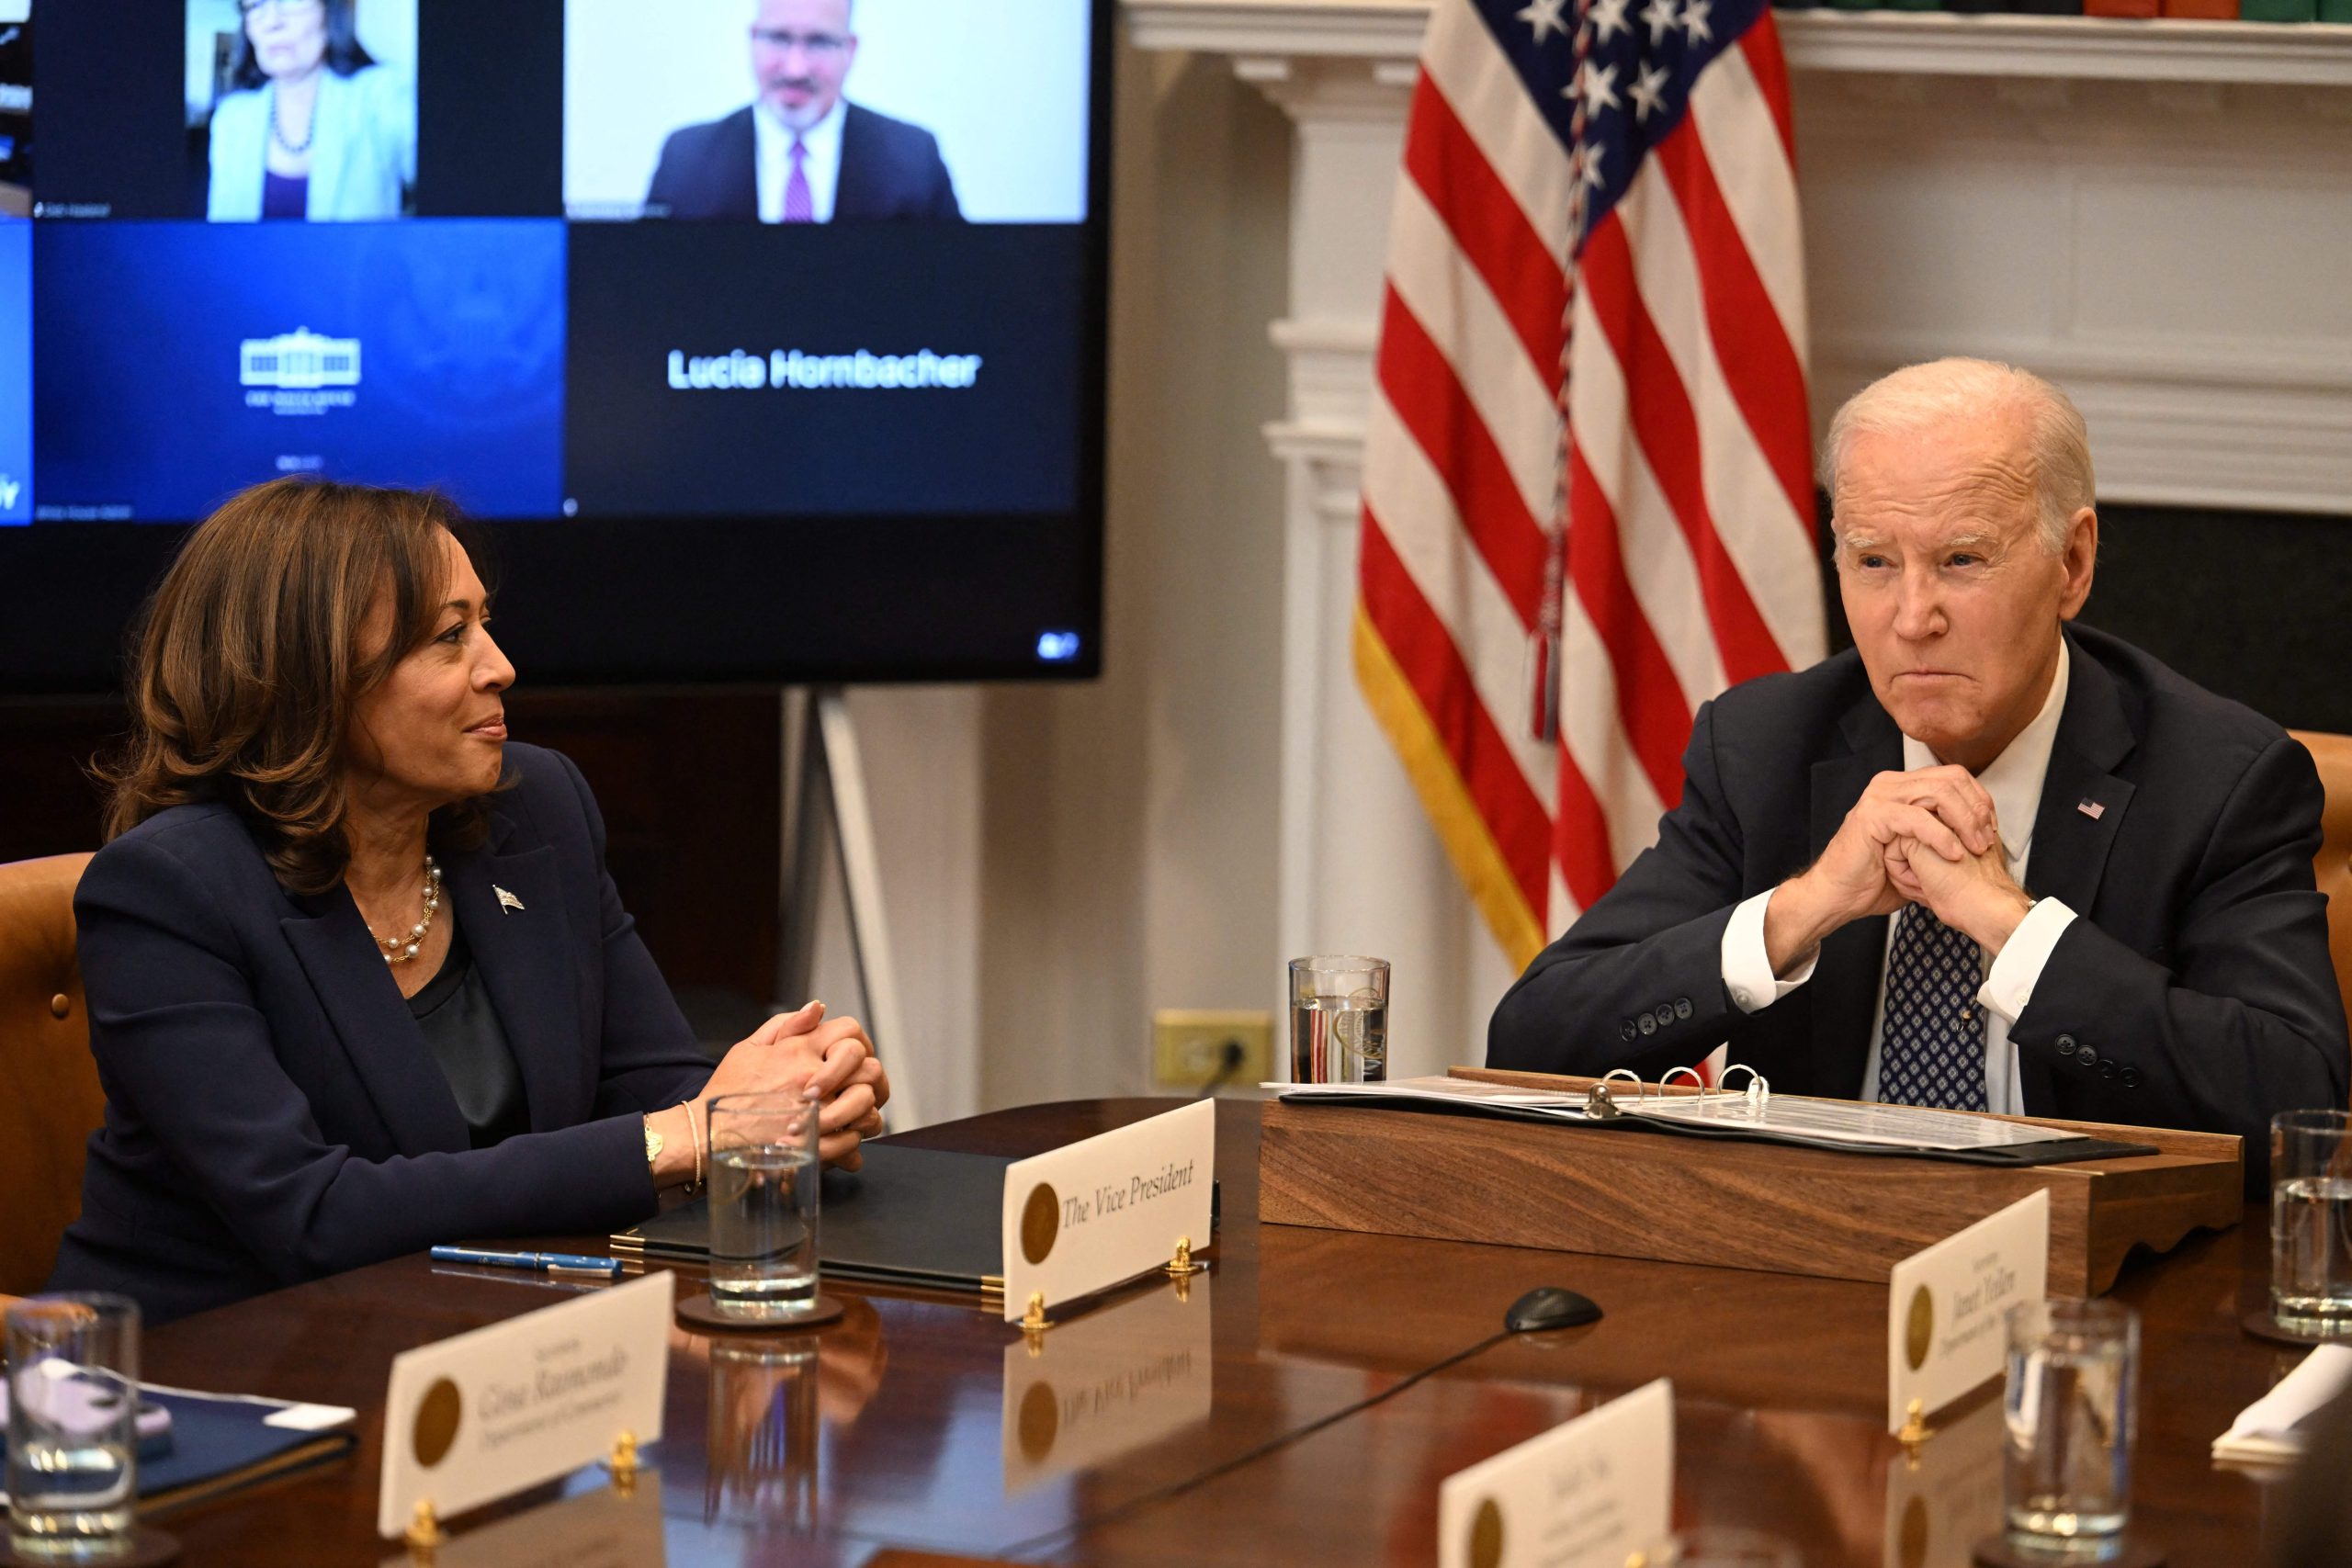 President Biden meets with AI CEOs at the White House amid ethical criticism